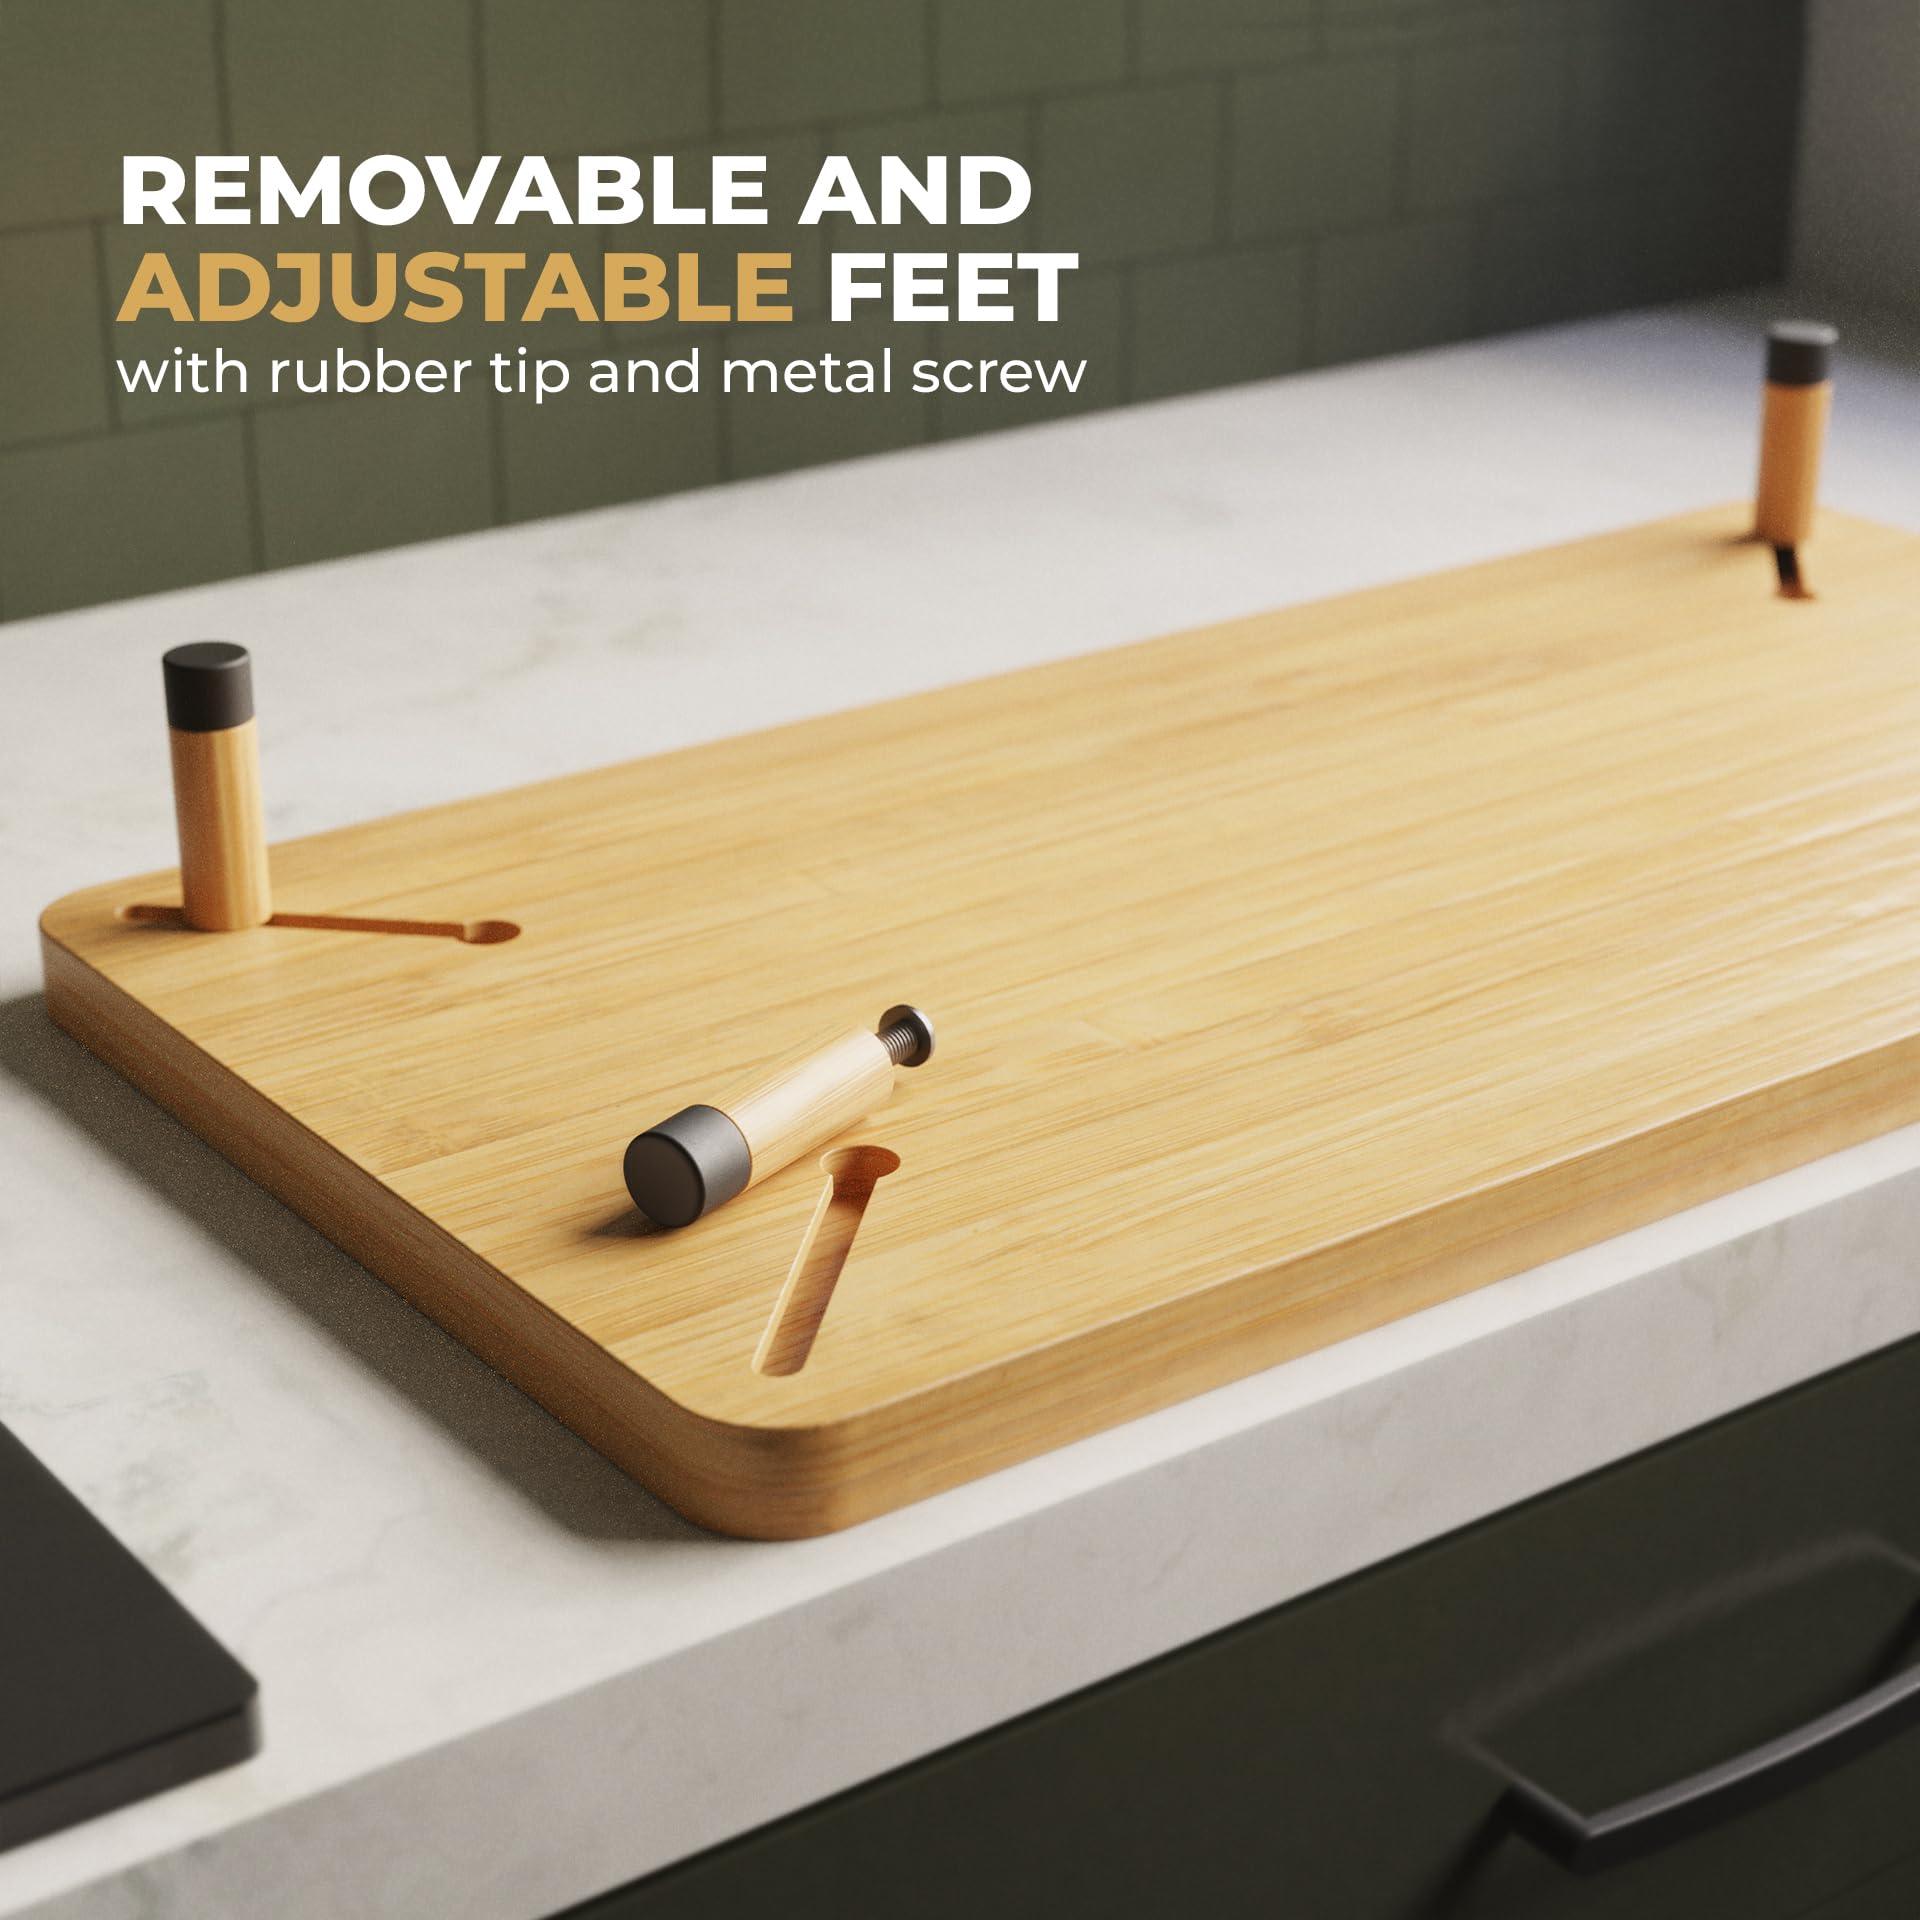 Prosumer's Choice Bamboo Stove Top Cover Board - Stylish and Versatile Wooden Stove Cover with Adjustable & Removable Feet, Large Cutting Area - Ideal for Kitchen Use - 3"H x 21.5"L x 11"W